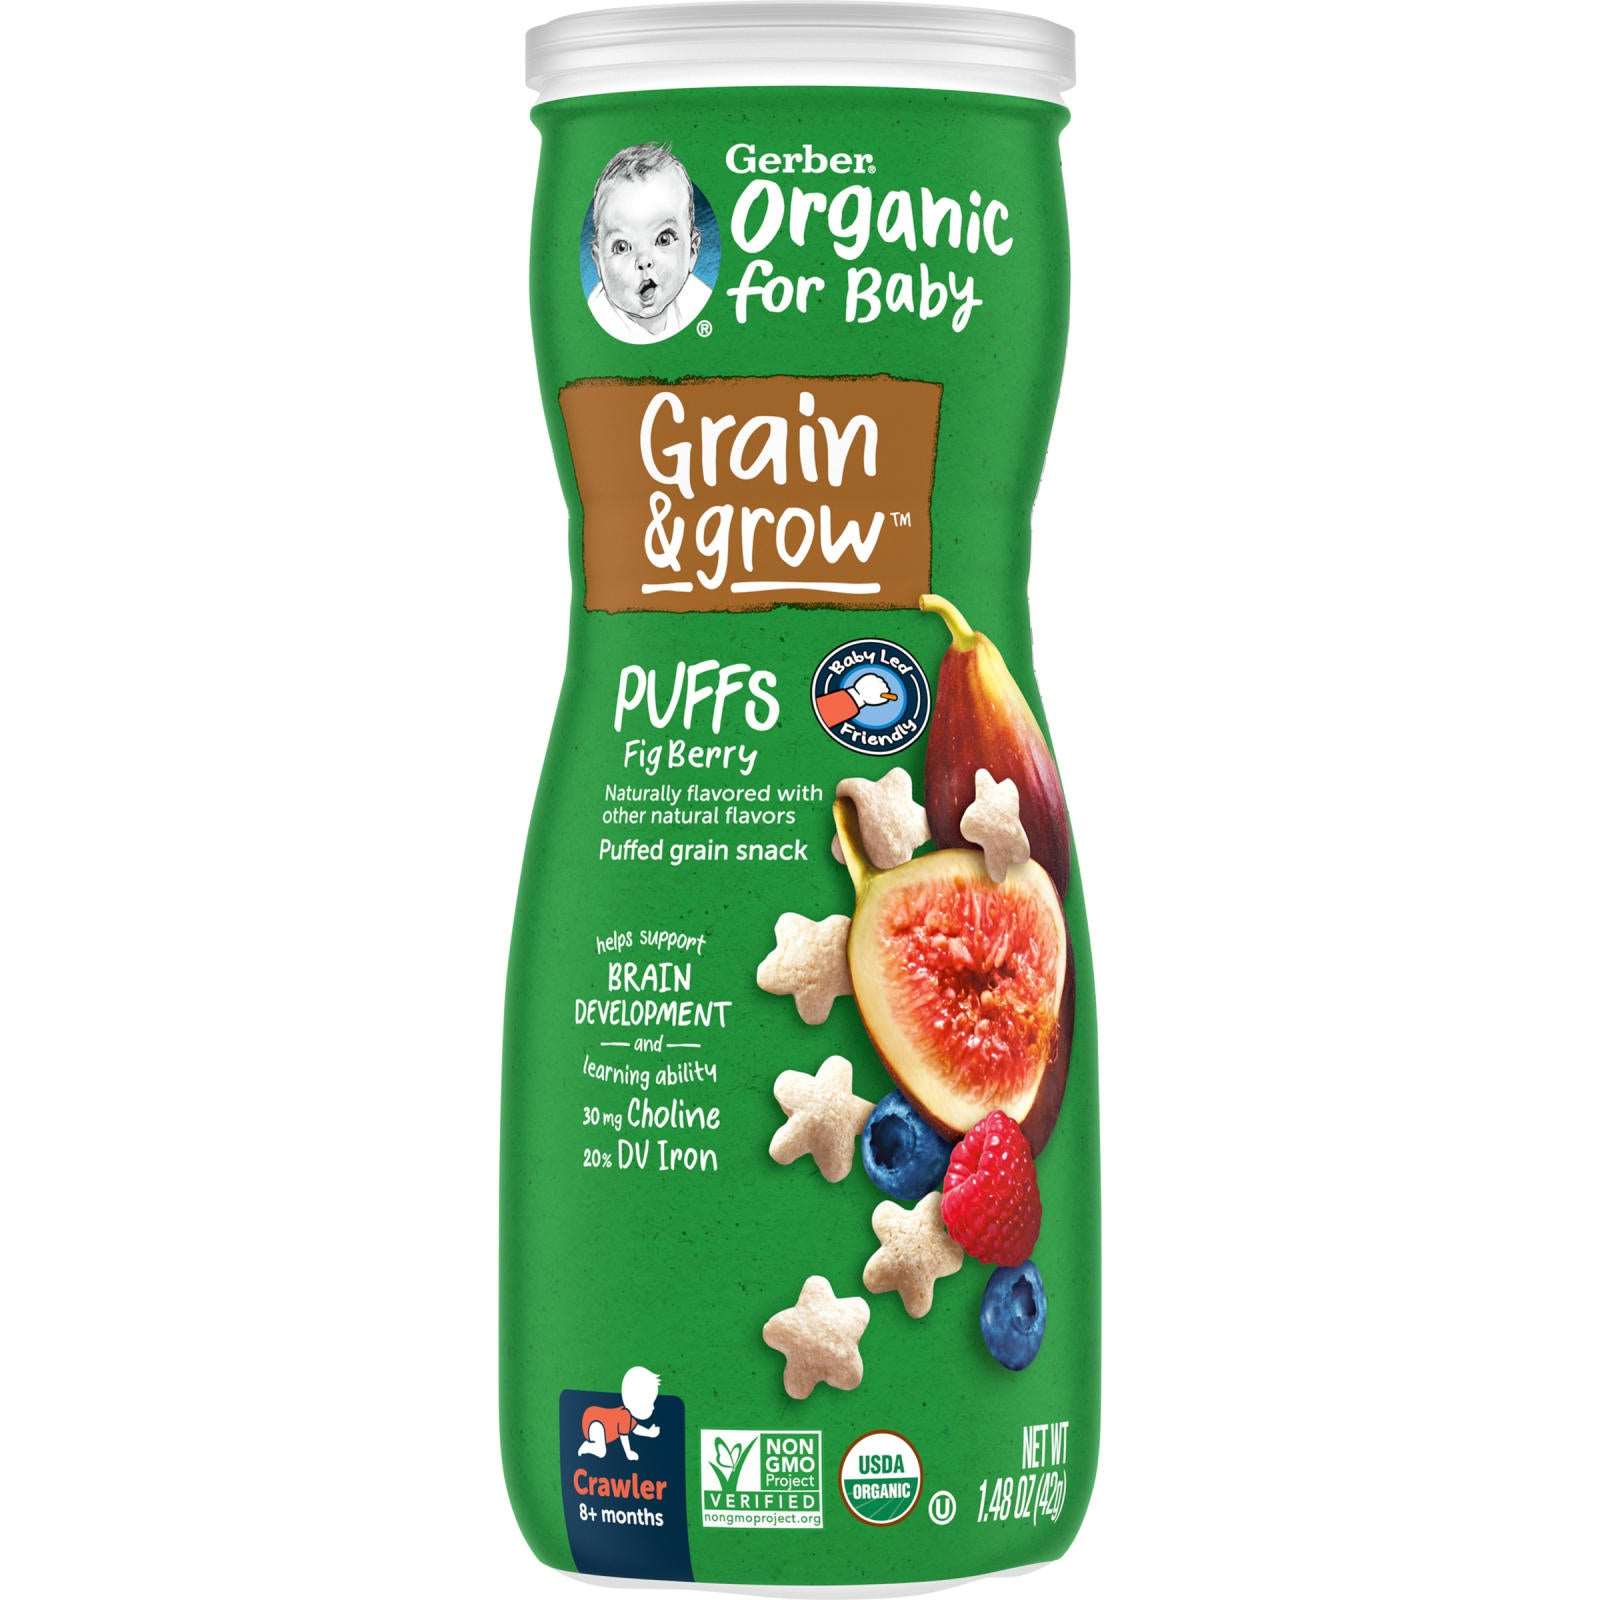 Gerber, Organic for Baby, Grains and Growth, Puffs, Puffed Grain Snack, 8+ Months, Fig Berry, 1.48 oz (42 g)